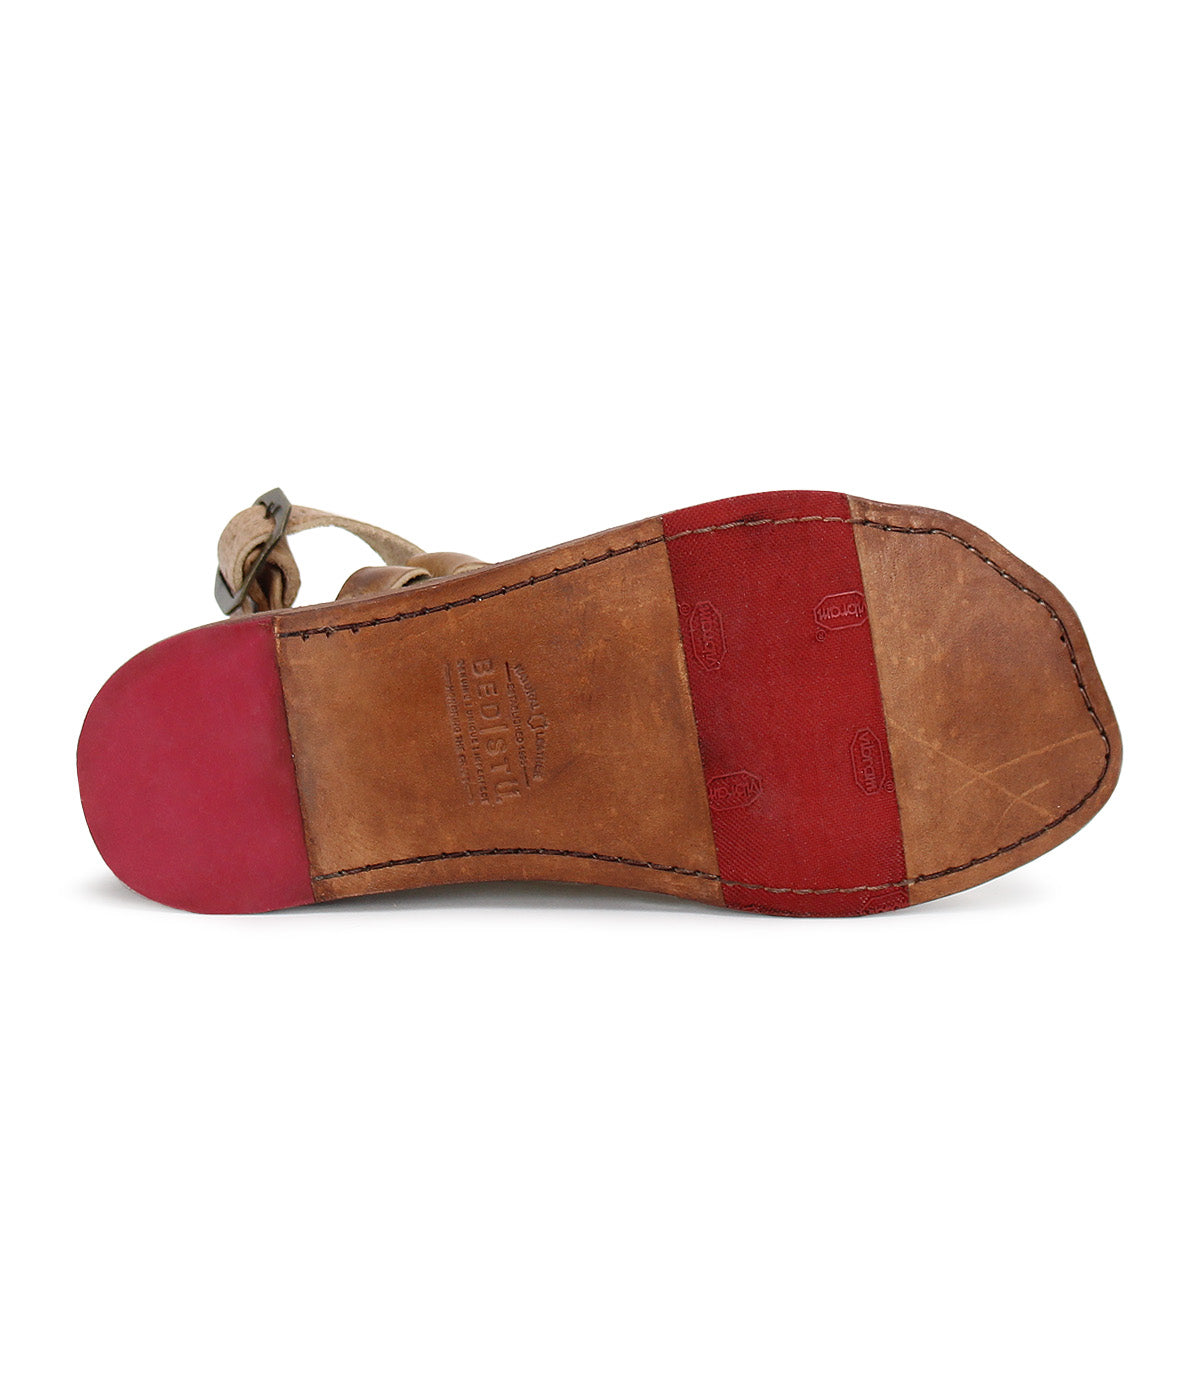 A pair of Bed Stu Voleta women's brown and red sandals.